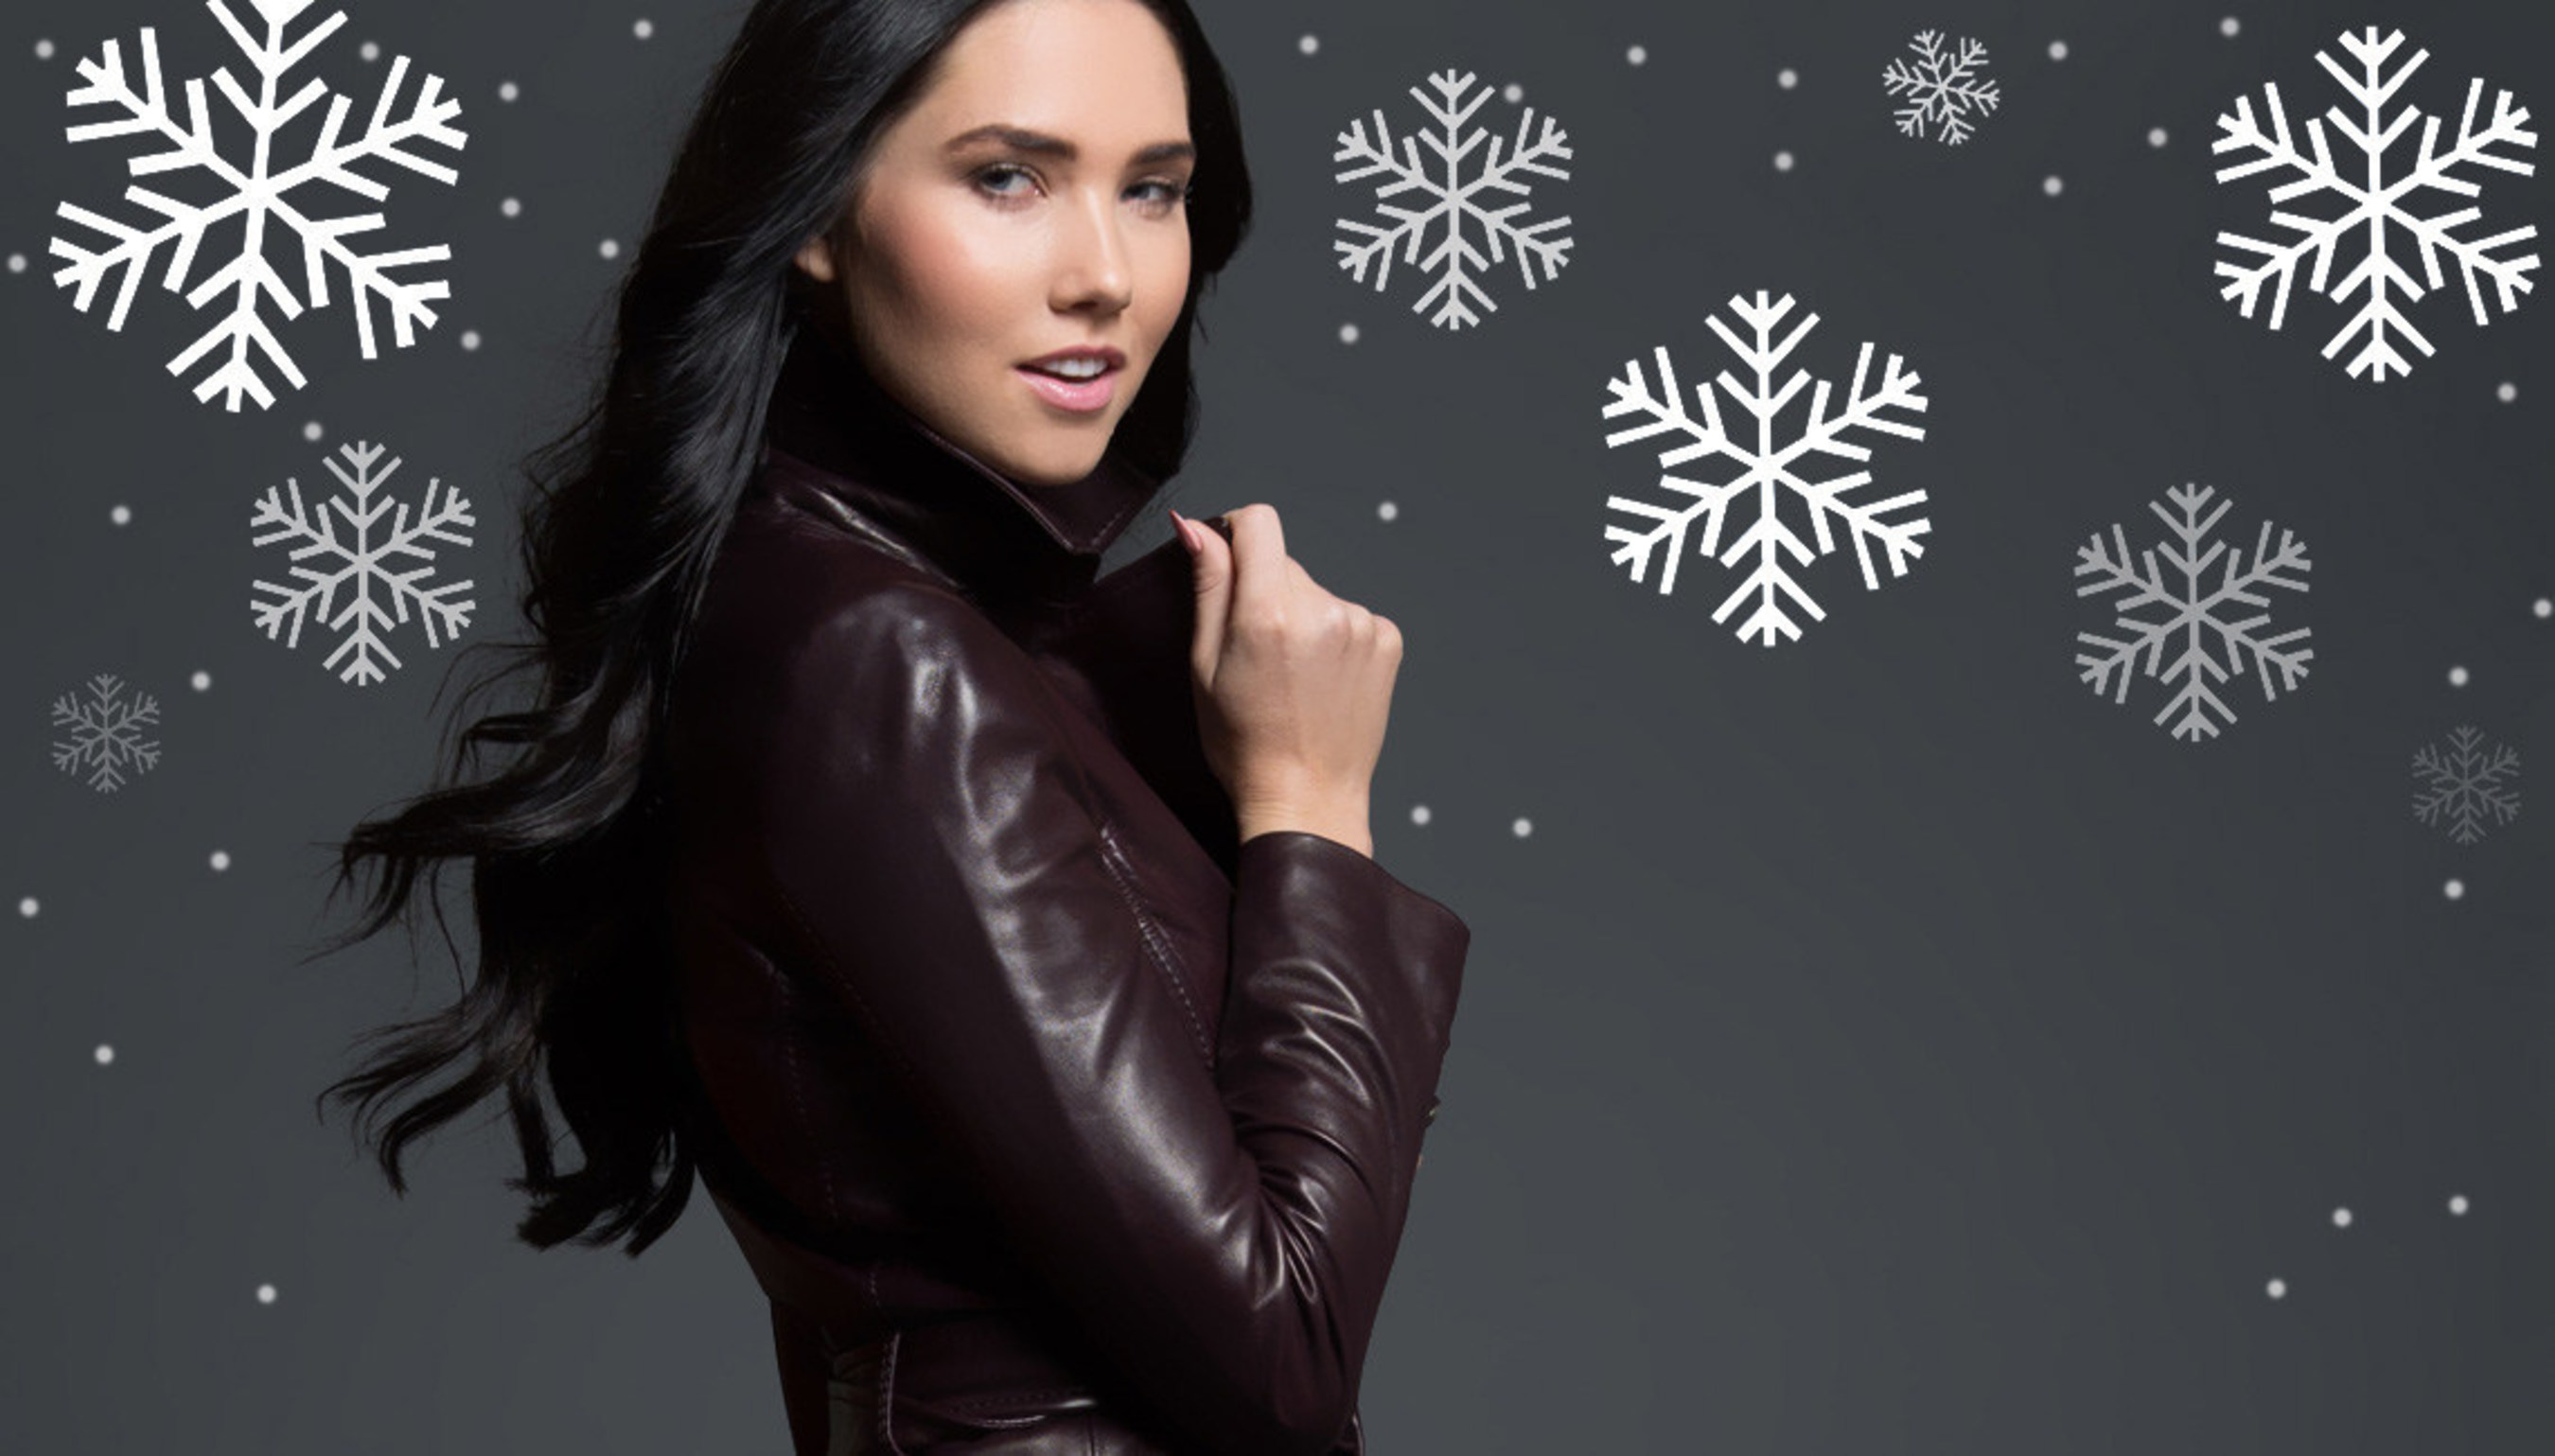 LeJolie.com brings you Access to Excess this holiday season with an extended blowout sale lasting until Christmas Day!